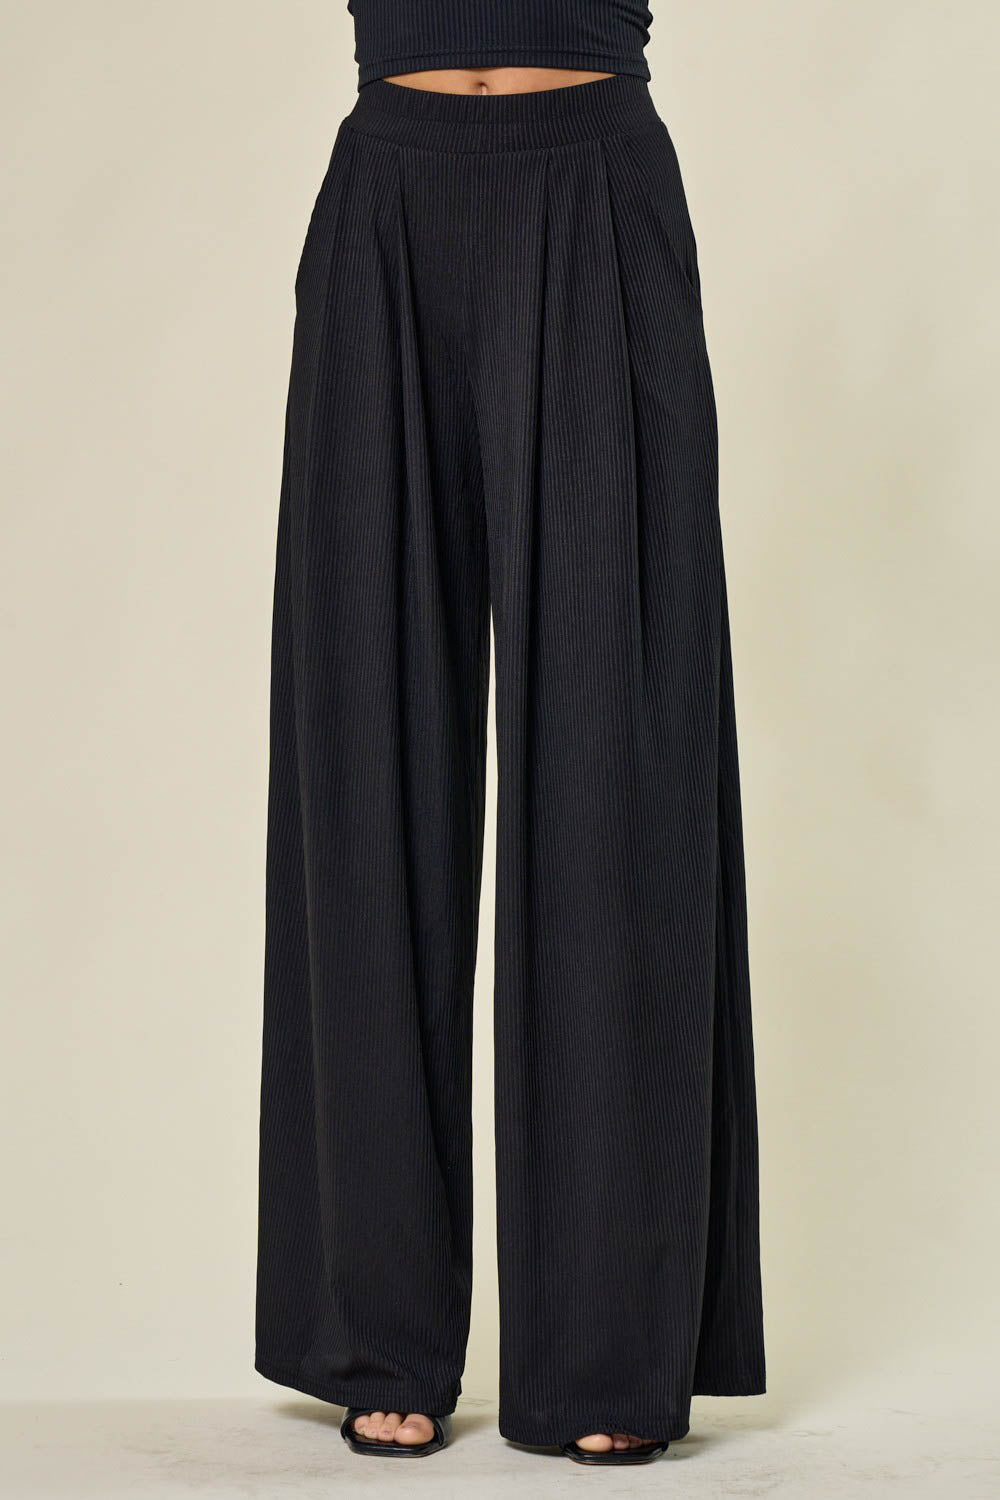 Express Stylist High Waisted Pleated Wide Leg Palazzo Pant Women's Short |  CoolSprings Galleria